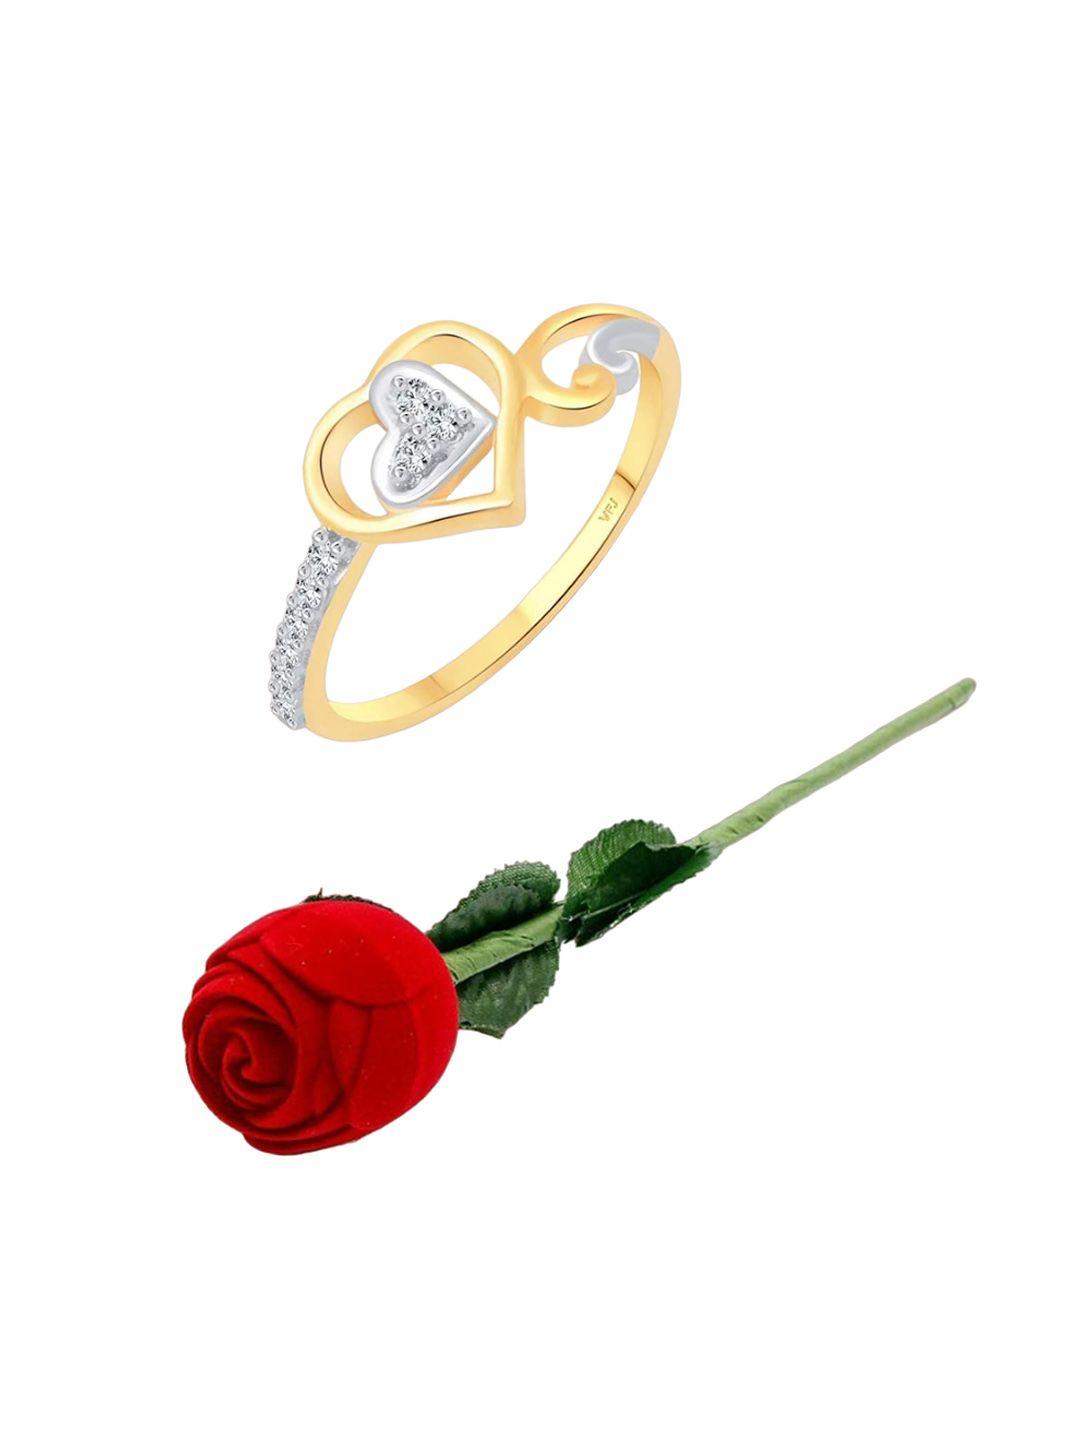 vighnaharta gold-plated cz-stone studded heart design finger ring with rose box